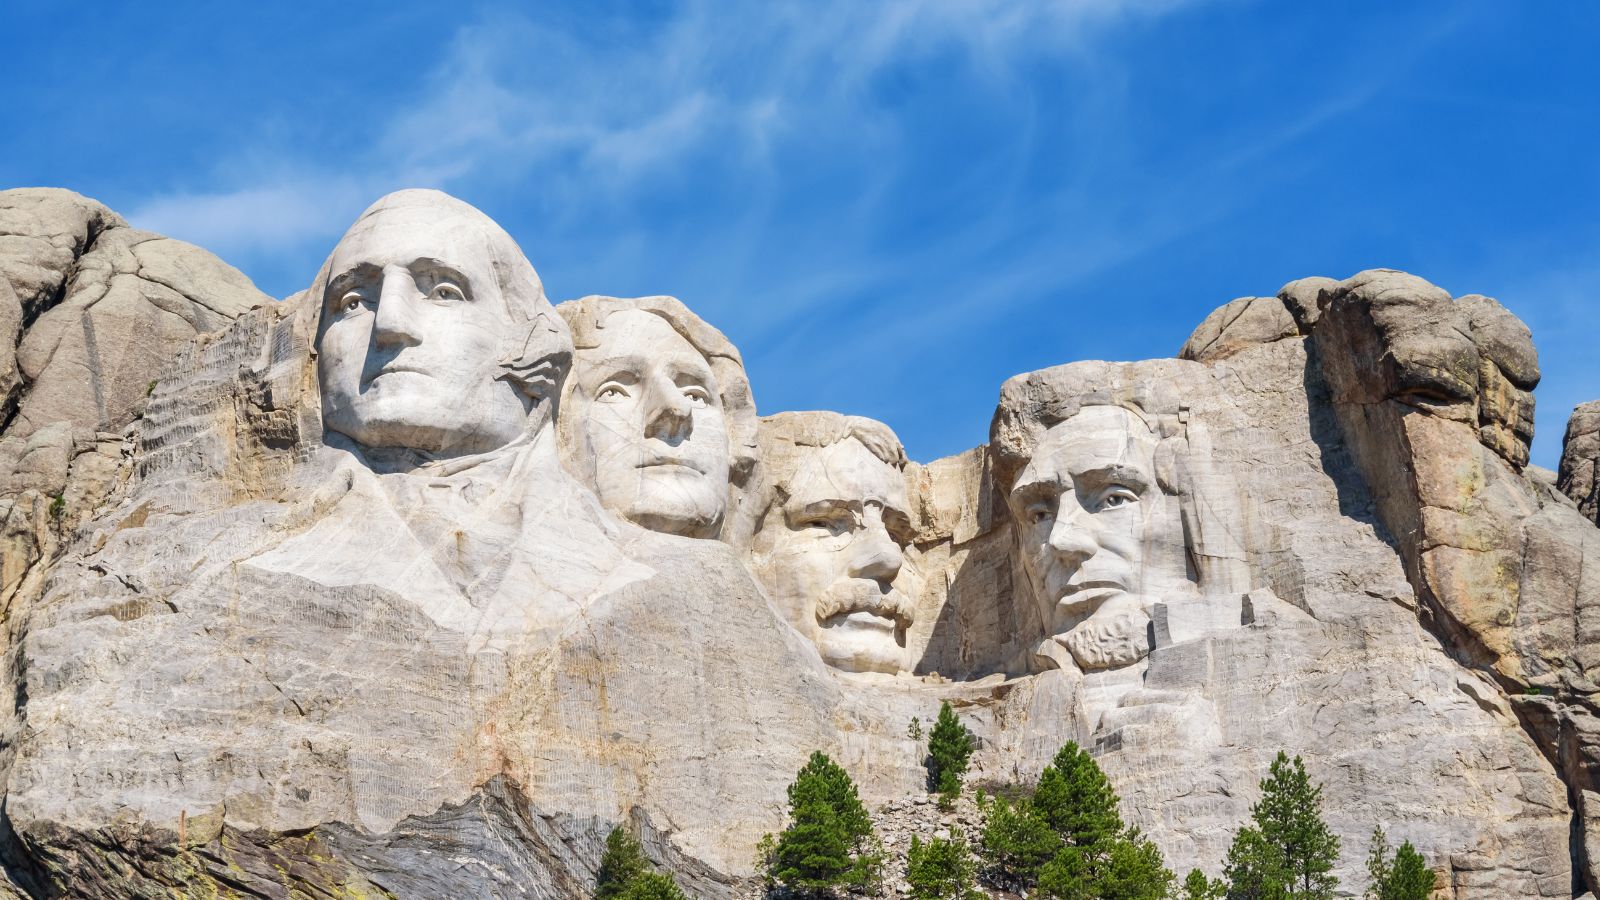 <p>Recommended by 58% of visitors</p><p>Mount Rushmore, an iconic American landmark in South Dakota’s Black Hills, is a national memorial that attracts two million visitors annually. Carved into a rock face in the early 20th century, it features the imposing visages of four esteemed American presidents: Thomas Jefferson, George Washington, Abraham Lincoln, and Theodore Roosevelt. The Presidential Trail offers an enhanced viewing experience of this monumental sculpture. The project was designed and supervised by Gutzon Borglum and completed under the stewardship of his son.</p>